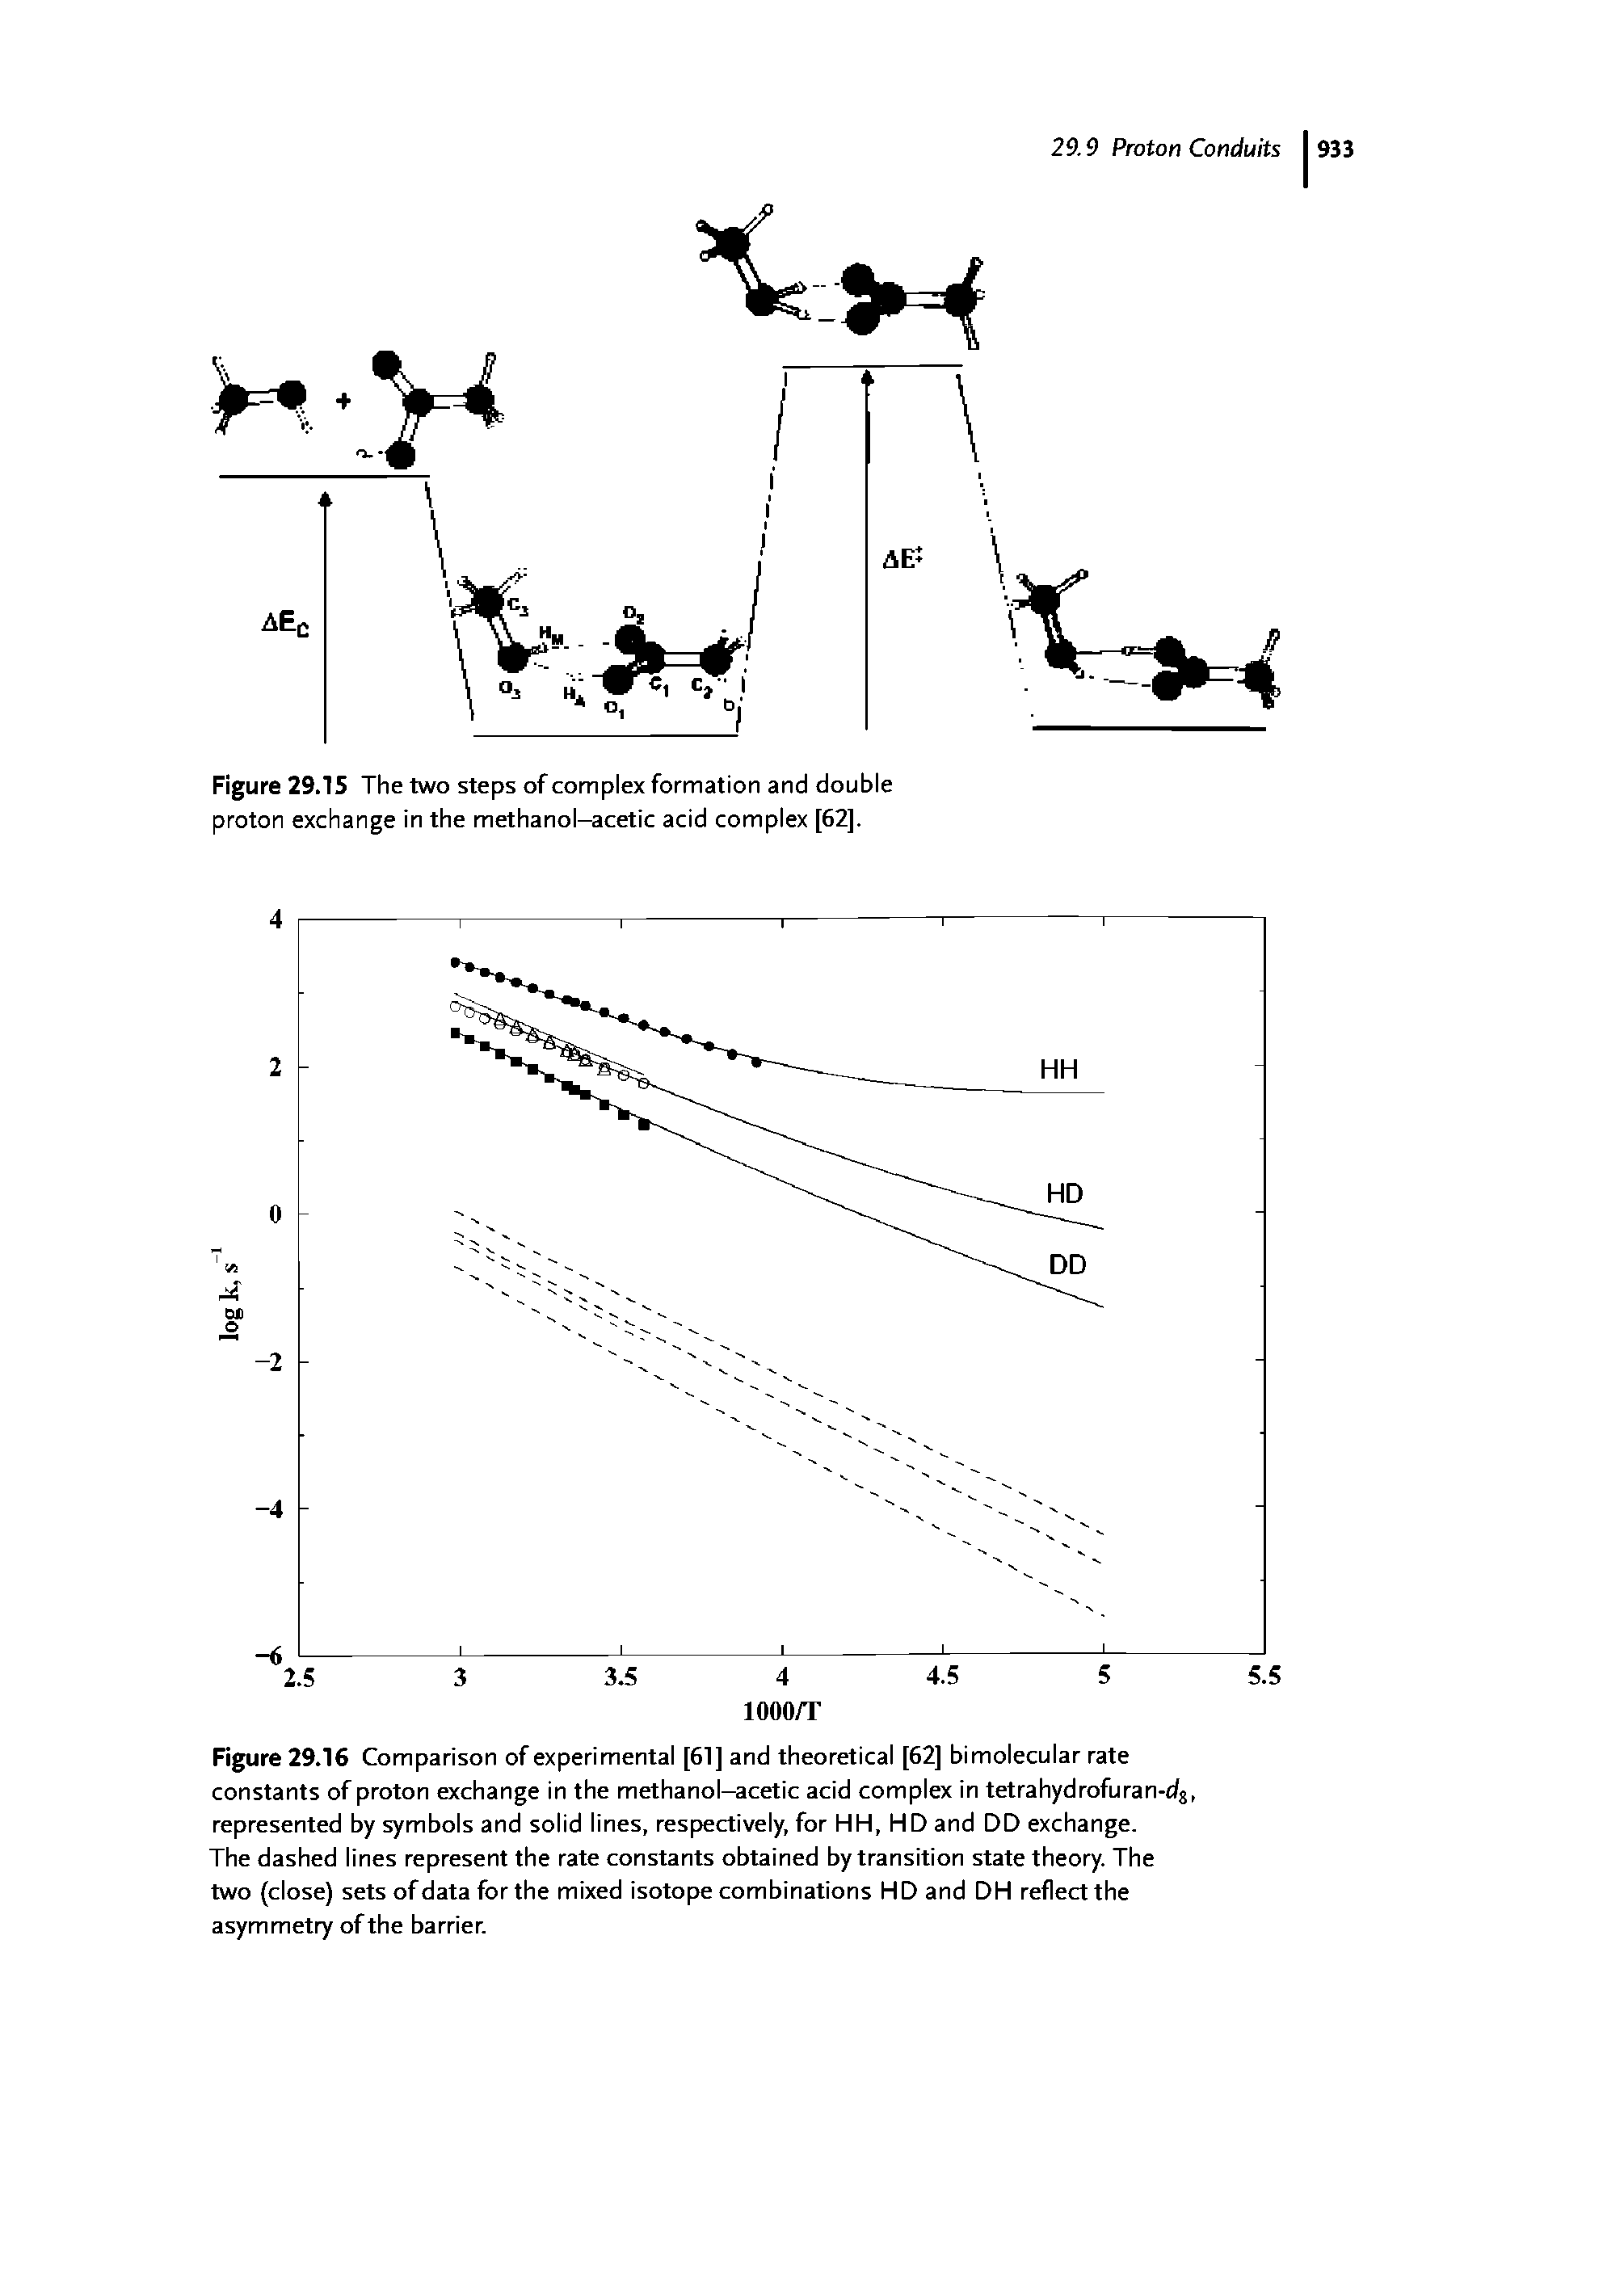 Figure 29.16 Comparison of experimental [61] and theoretical [62] bimolecular rate constants of proton exchange in the methanol—acetic acid complex in tetrahydrofuran-c/g, represented by symbols and solid lines, respectively, for HH, HD and DD exchange.